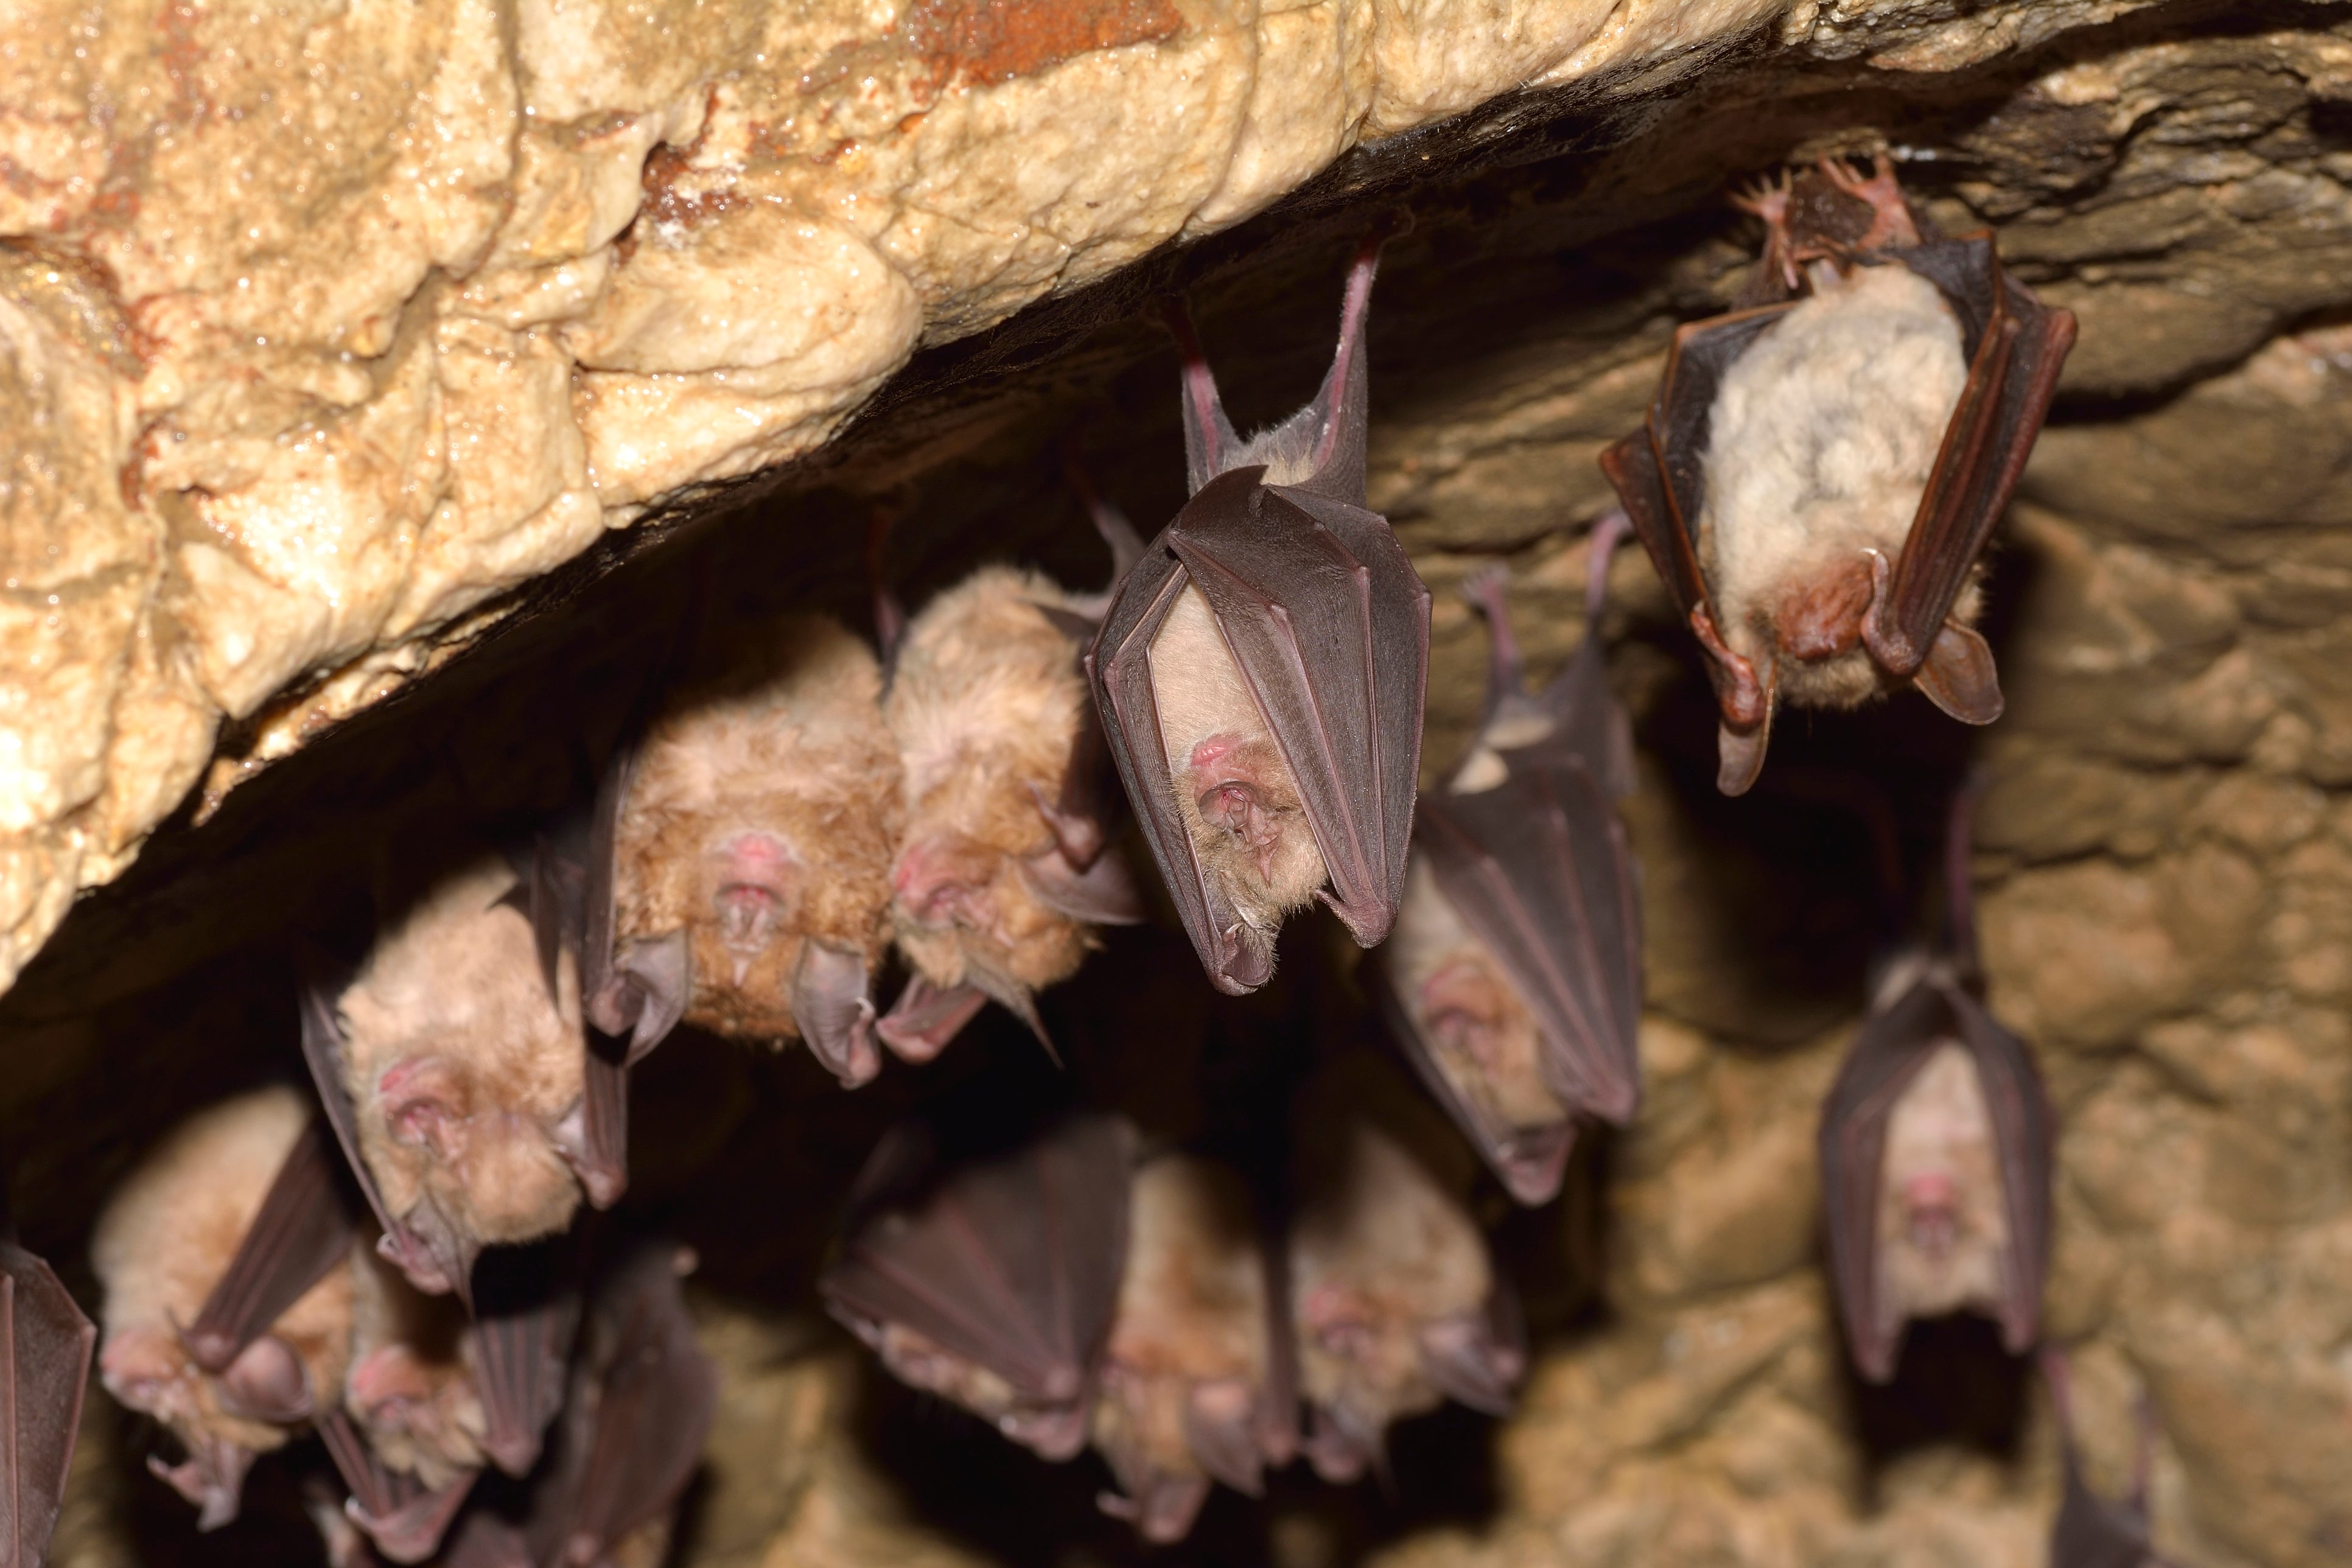 Bats, like these lesser mouse-eared bats and lesser horseshoe bats, are known to carry coronaviruses